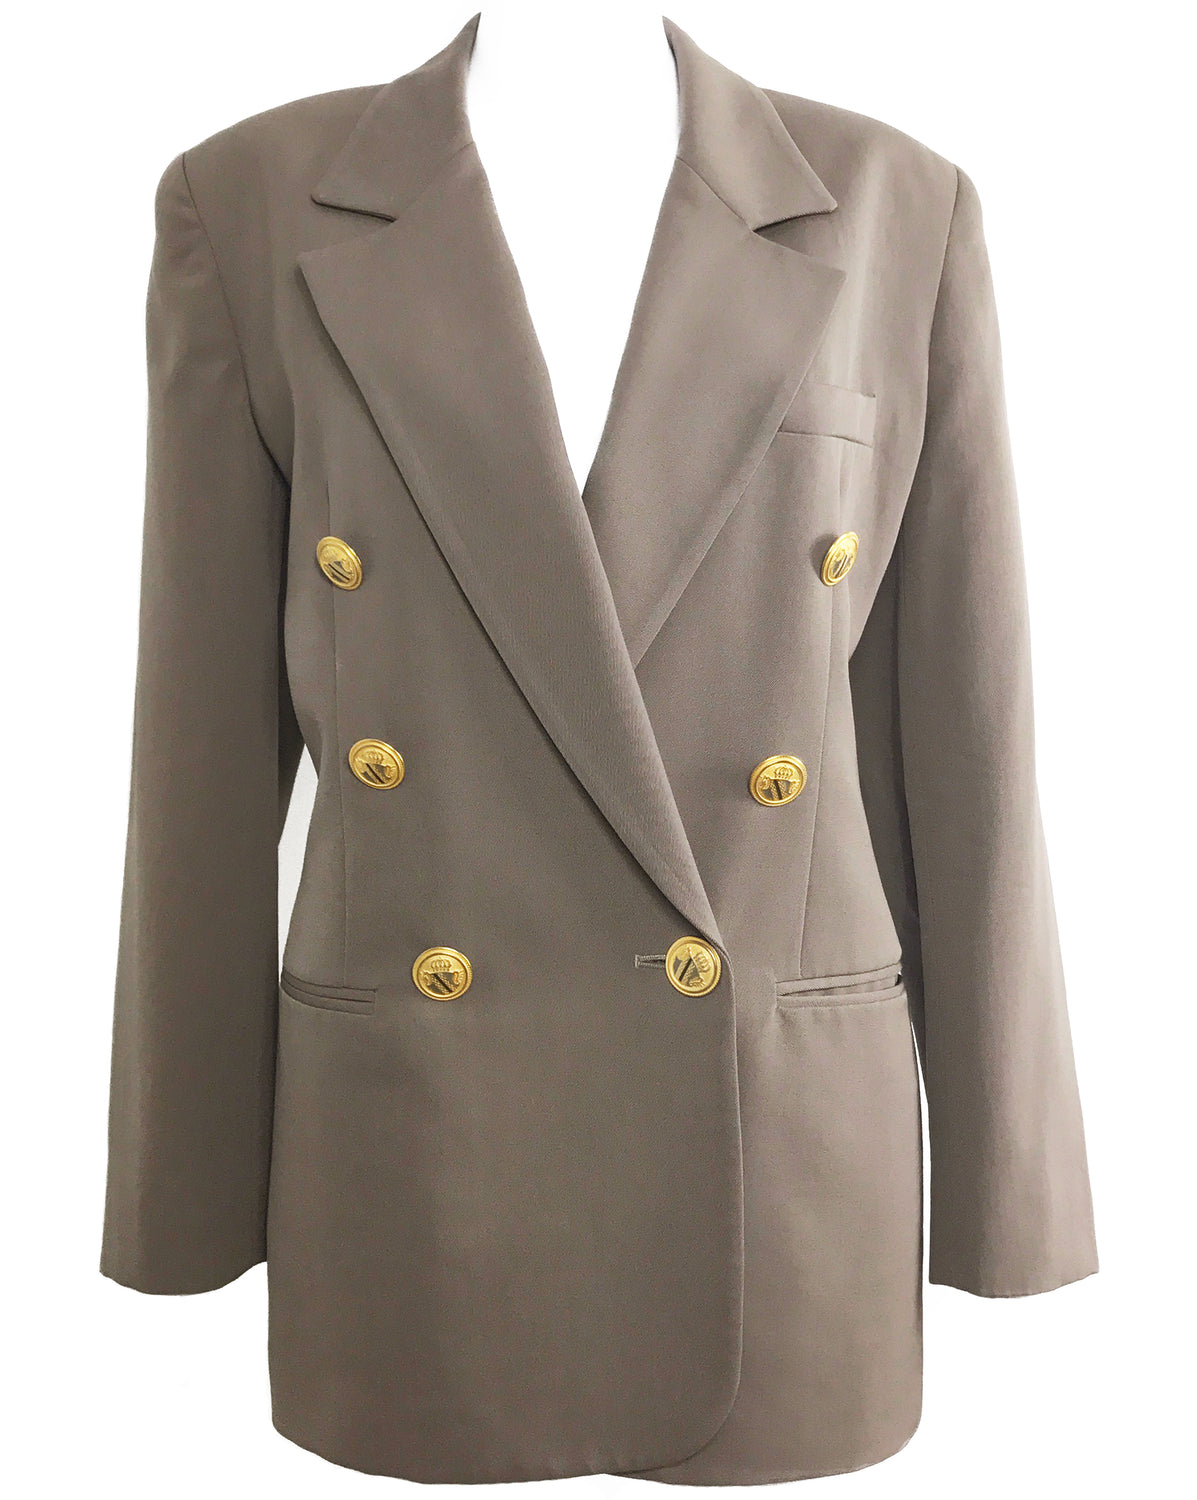 FRUIT Vintage Christian Dior 1980s Taupe Oversized Blazer gold buttons